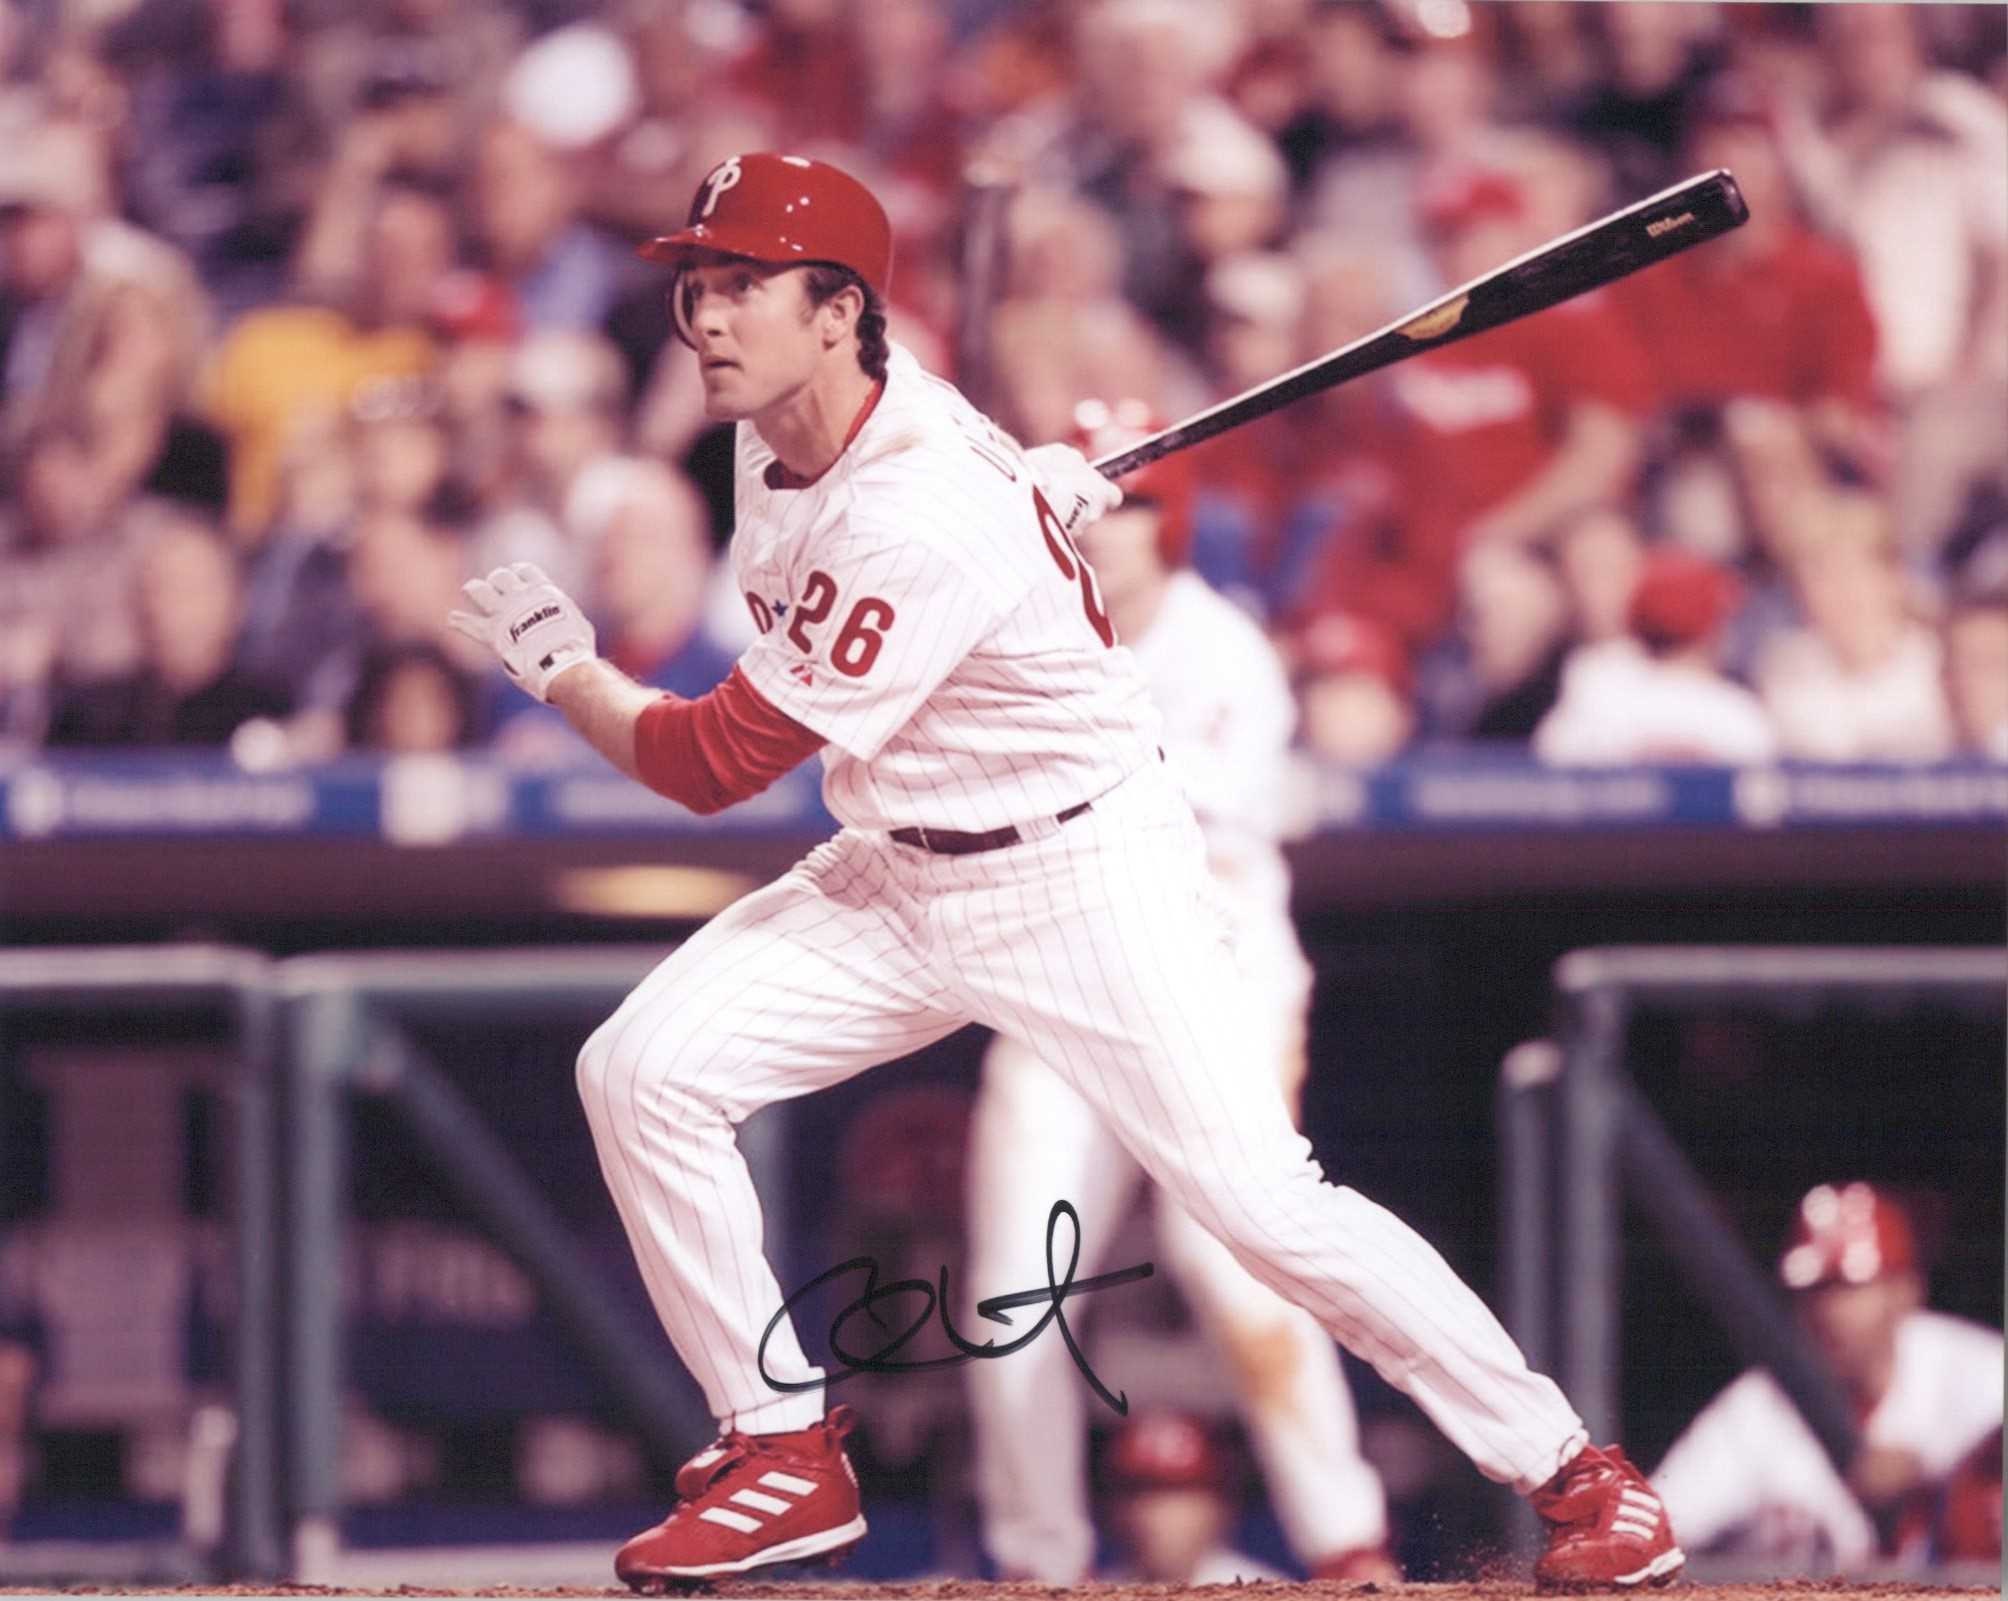 Chase Utley Signed Autographed Glossy 8x10 Photo 